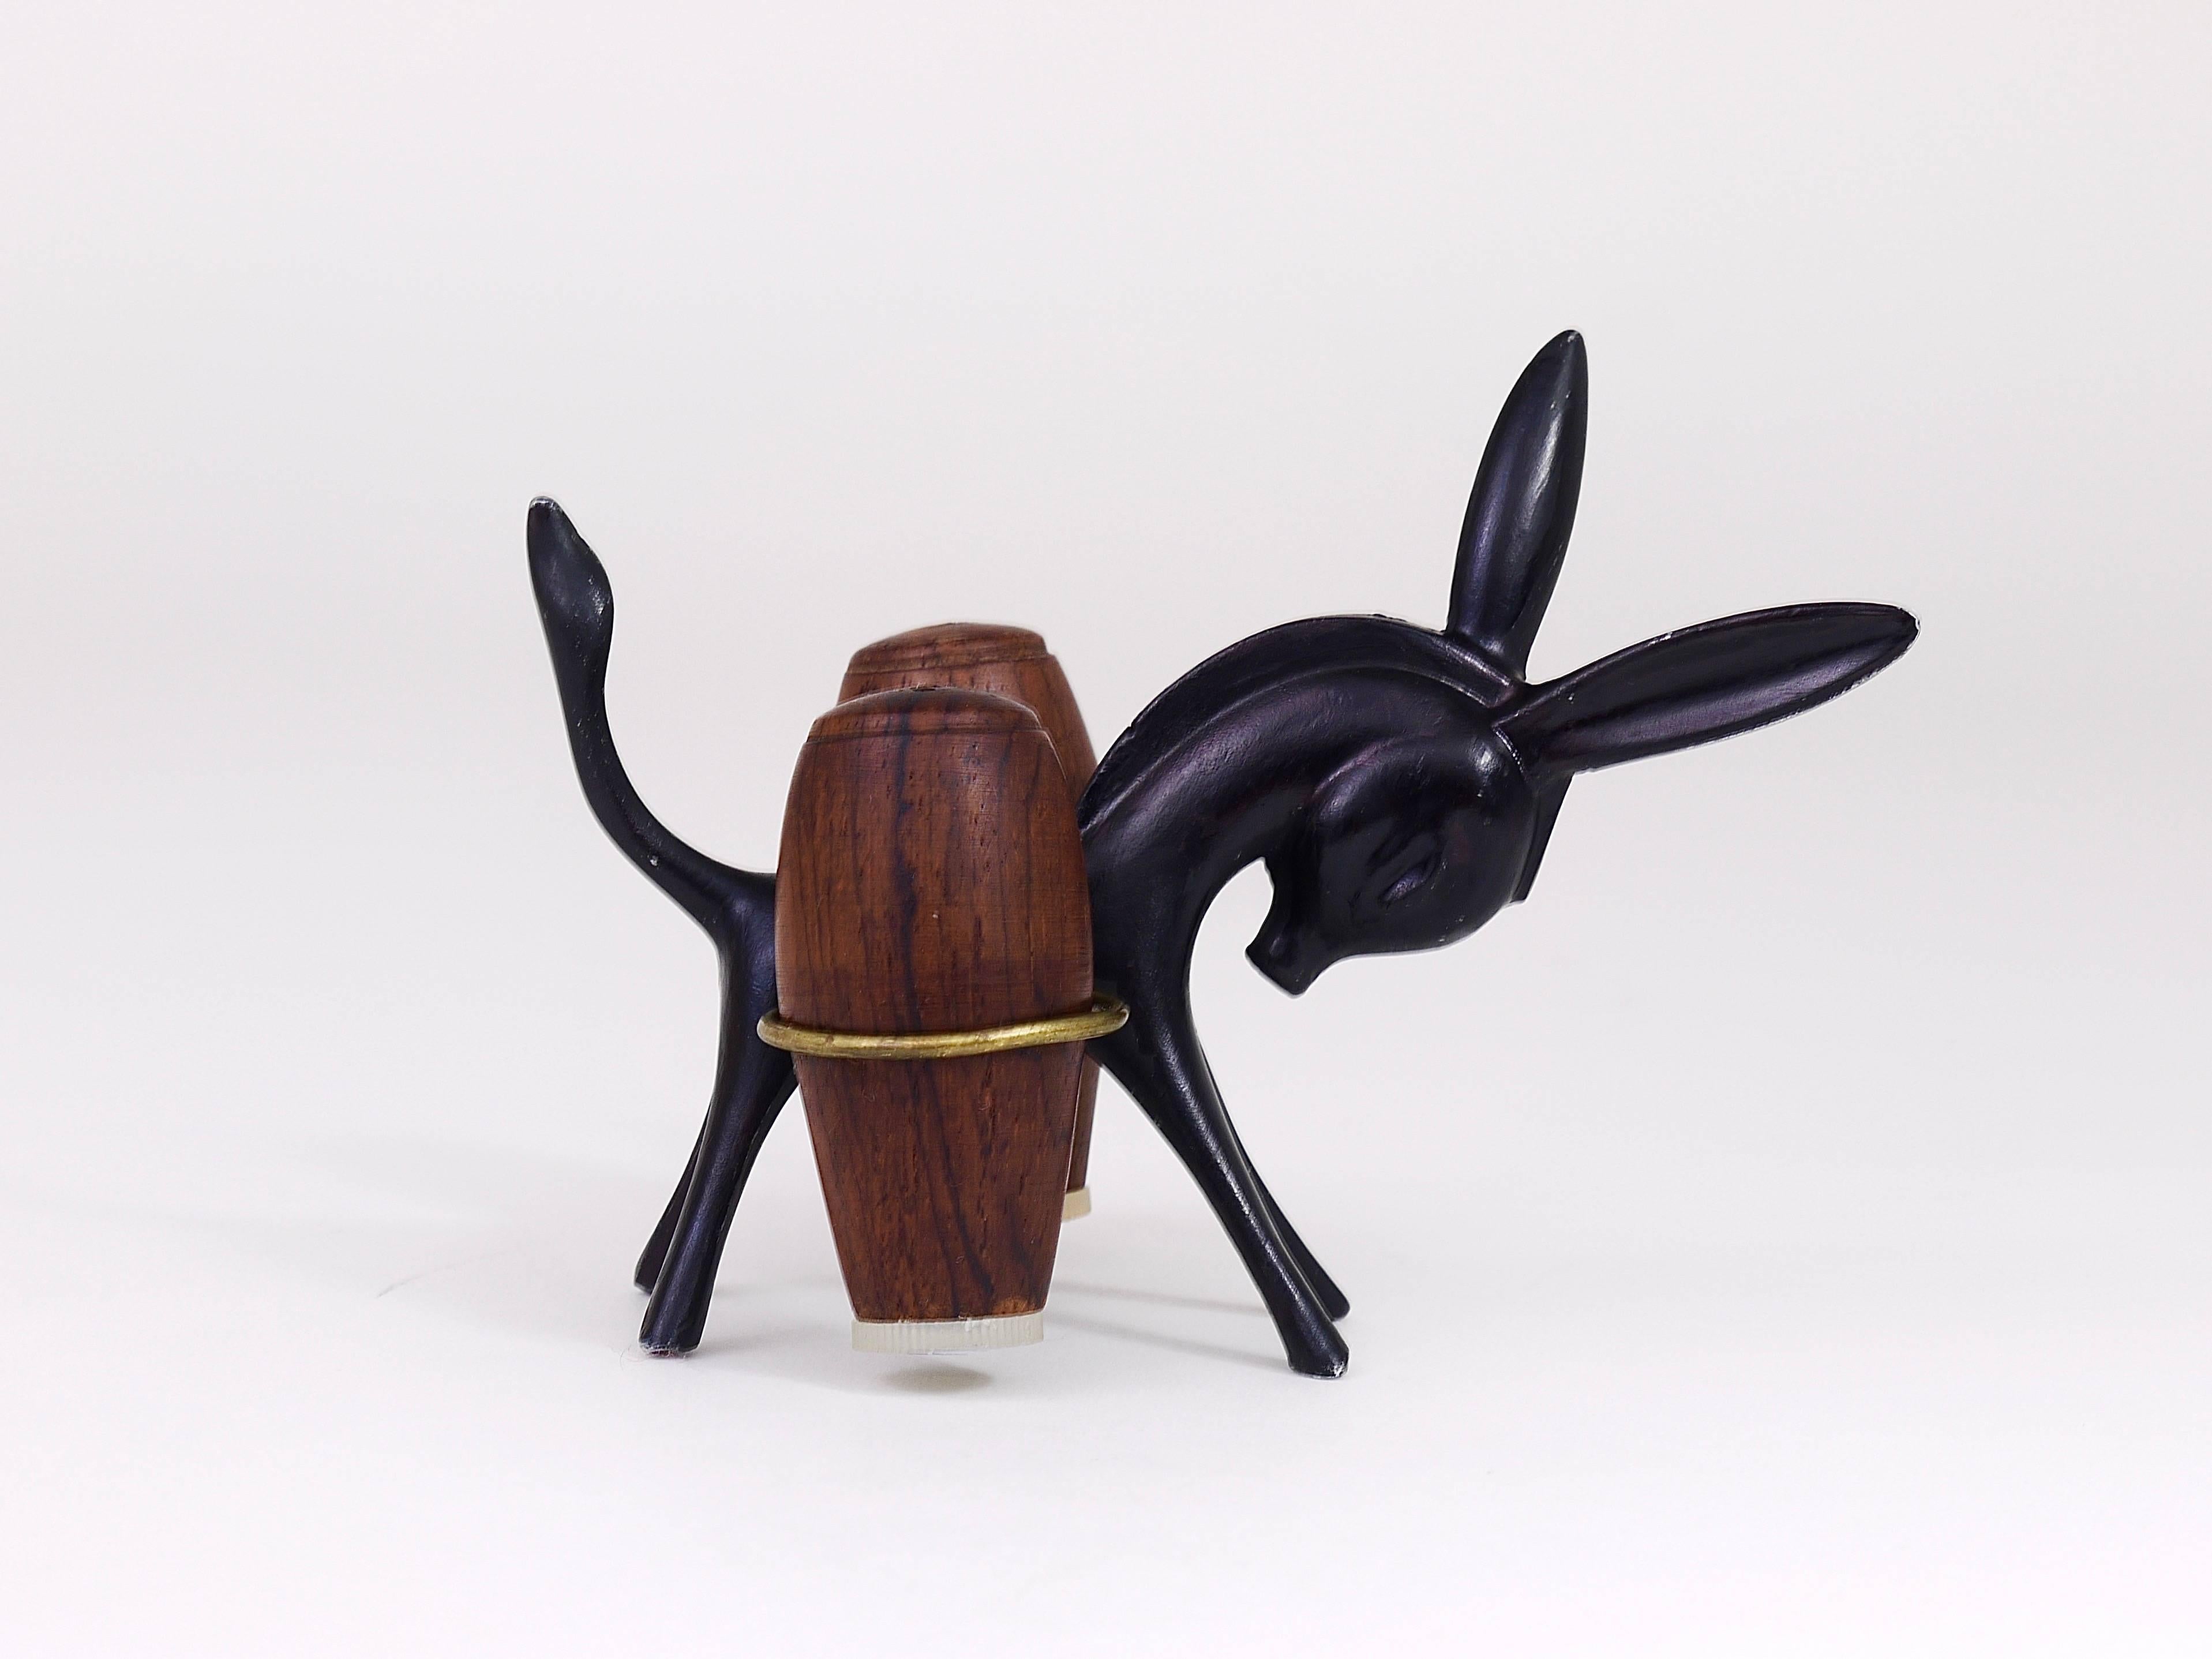 A charming Austrian midcentury shaker set, displaying a donkey. A very humorous design by Walter Bosse, executed by Hertha Baller Austria in the 1950s. Made of metal and walnut wood. In very good condition with marginal patina.